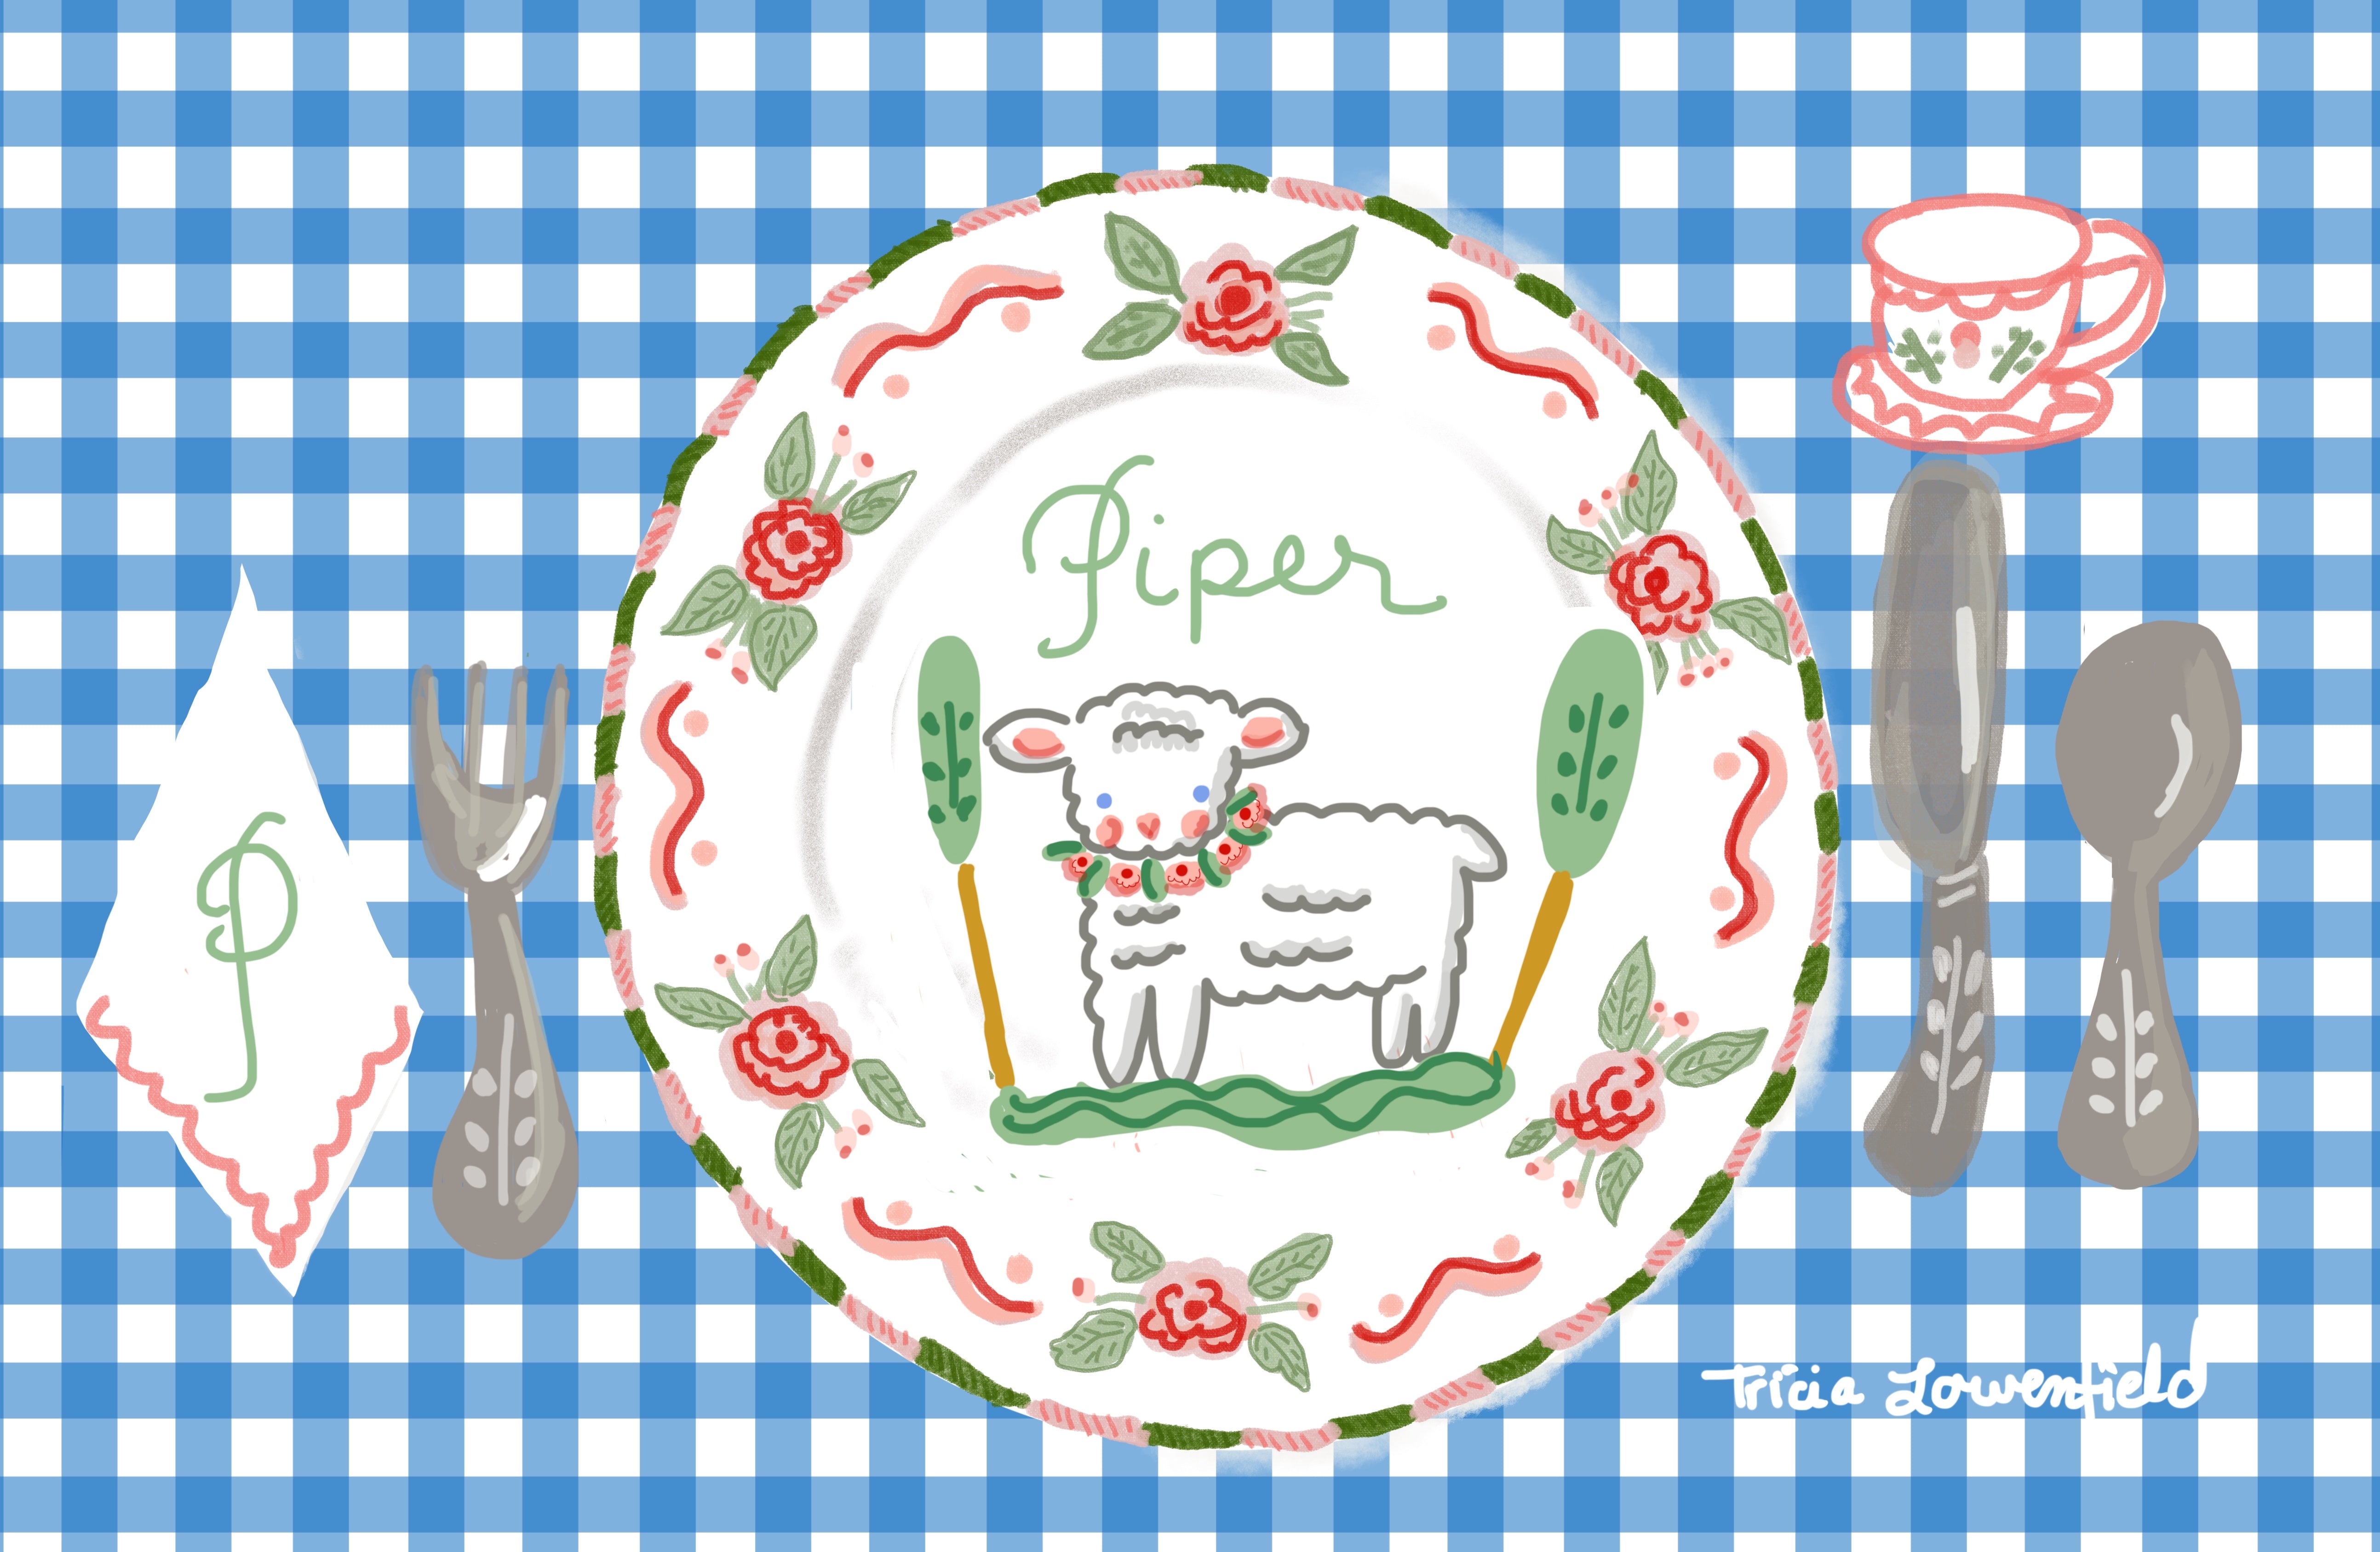 Blue Gingham Lamb Placemat (personalized) - Premium Placemat from Tricia Lowenfield Shop 